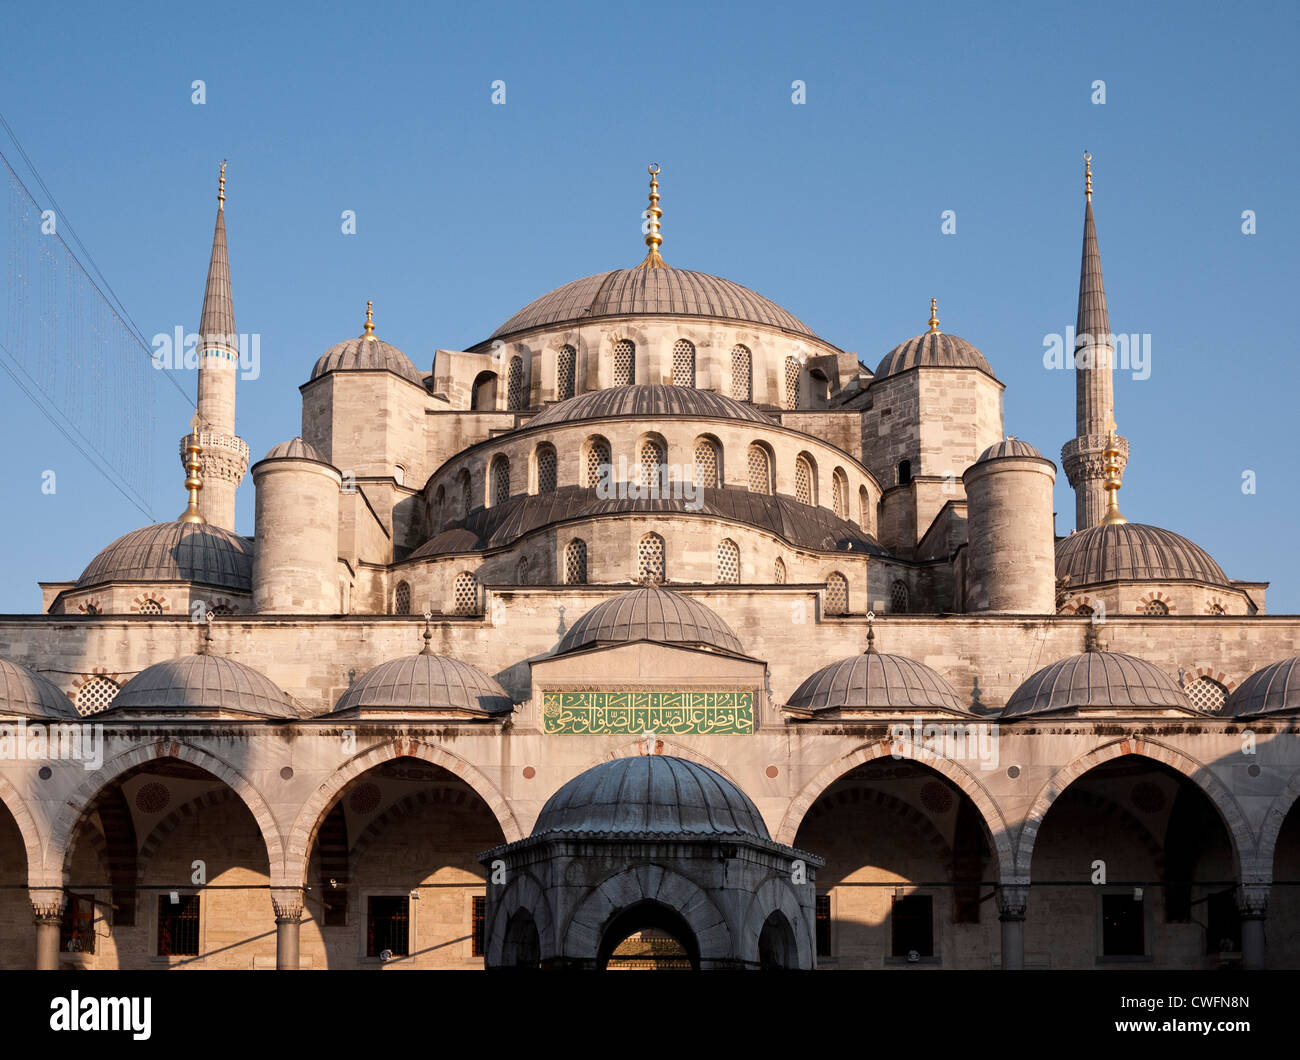 Domes and minarets of the Blue Mosque, Sultanahmet, Istanbul, Turkey Stock Photo